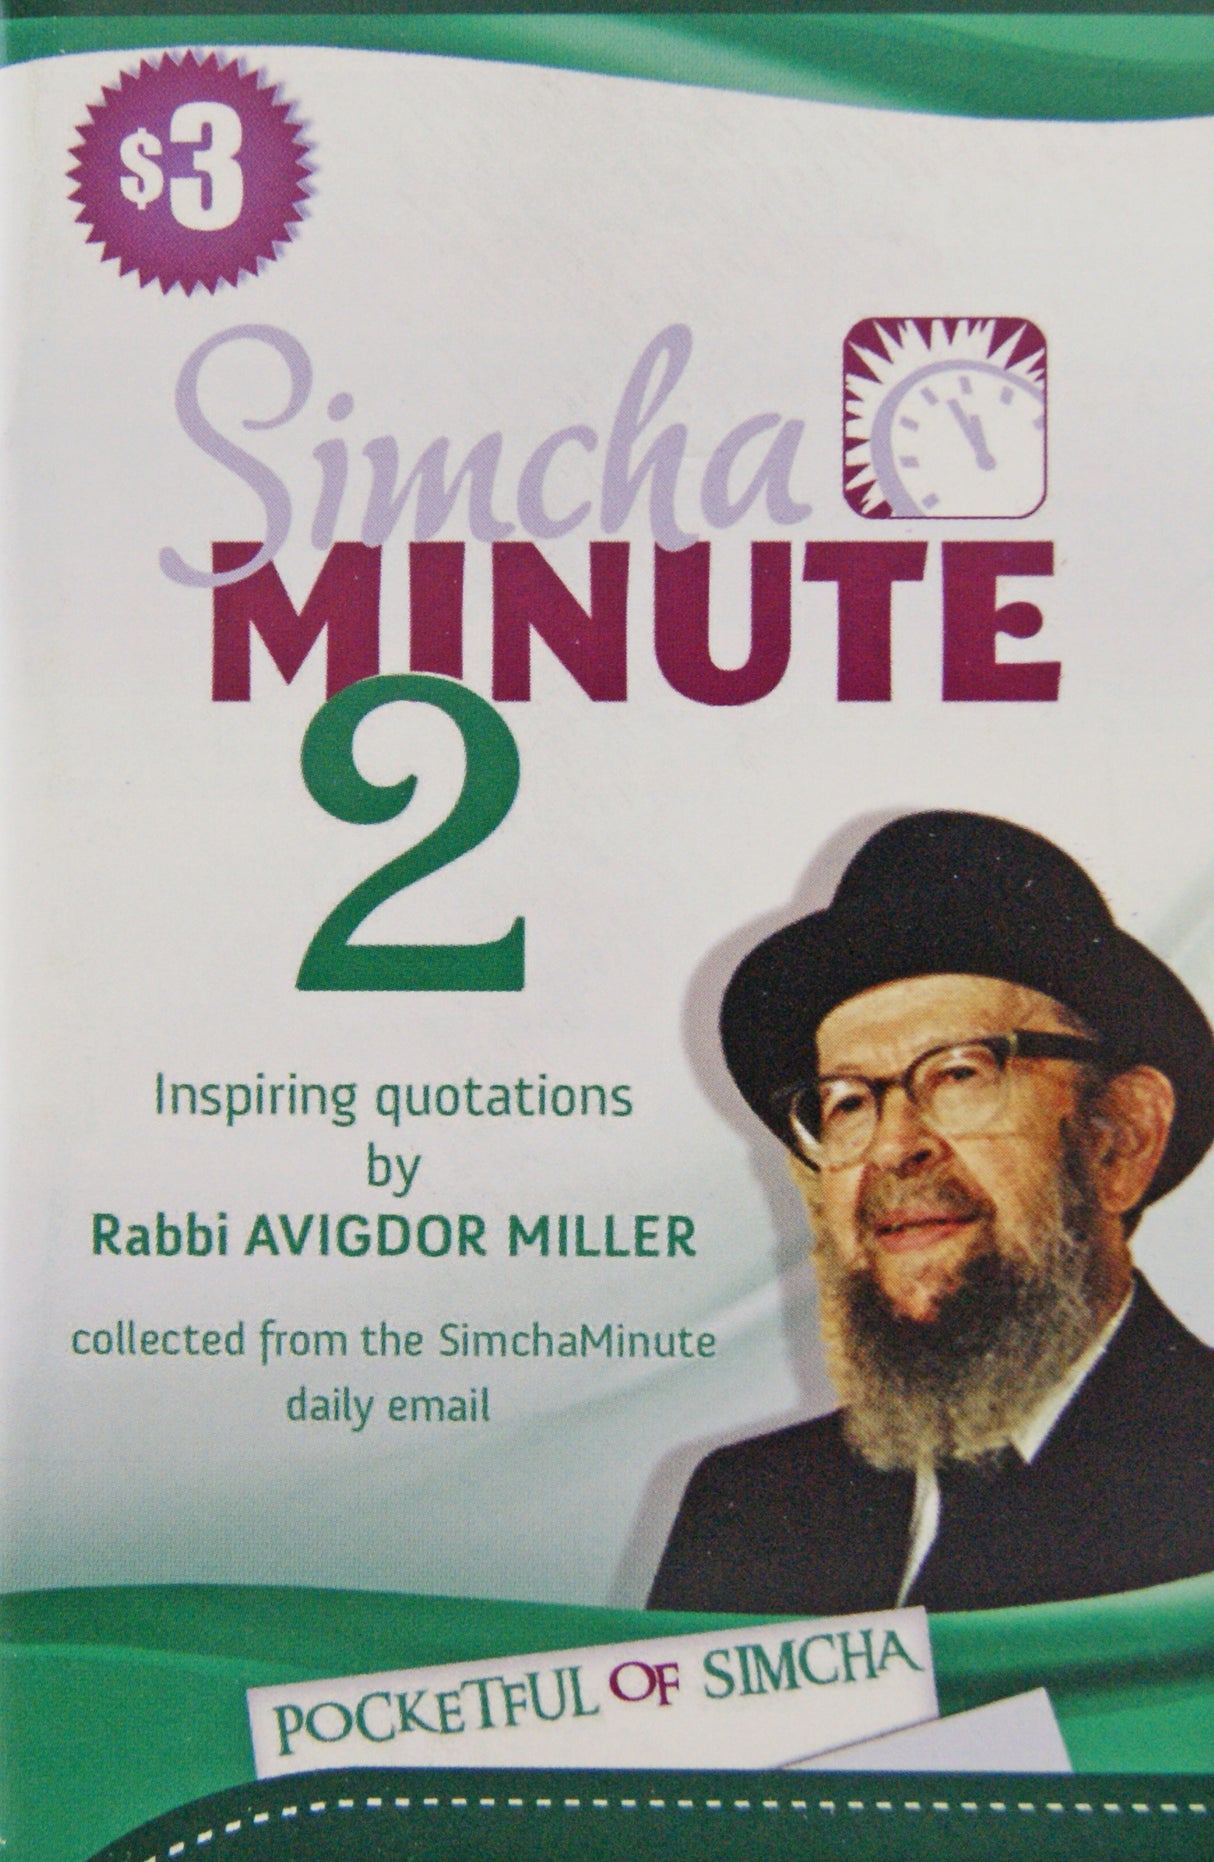 Simcha Minute 2 - Inspiring Quotations by R' Avigdor Miller